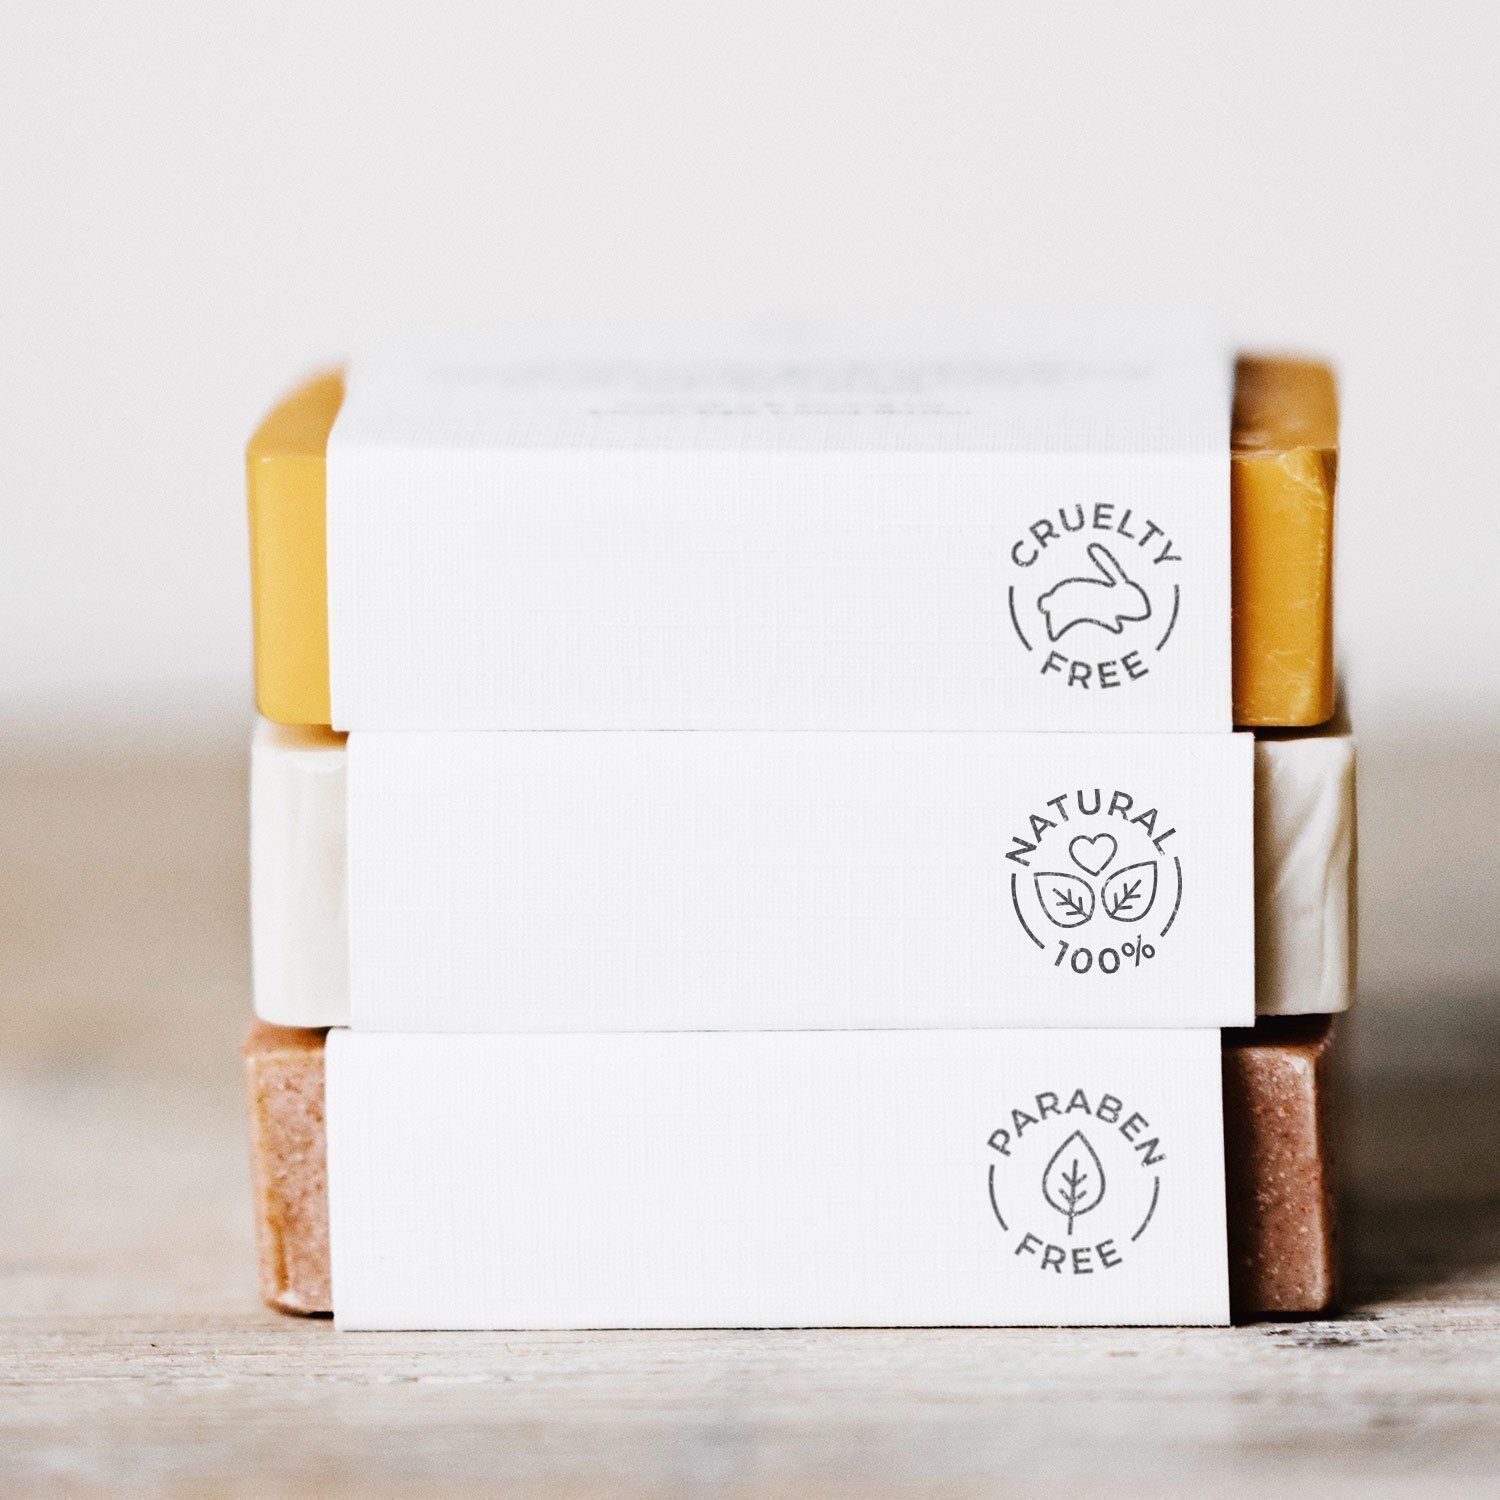 natural beauty icon stamps, natural cosmetic icon stamp for organic brand packages, cruelty free stamp, organic beauty packaging icon stamp - natural beauty icon stamps, natural cosmetic icon stamp for organic brand packages, cruelty free stamp, organic beauty packaging icon stamp -   beauty Icon free